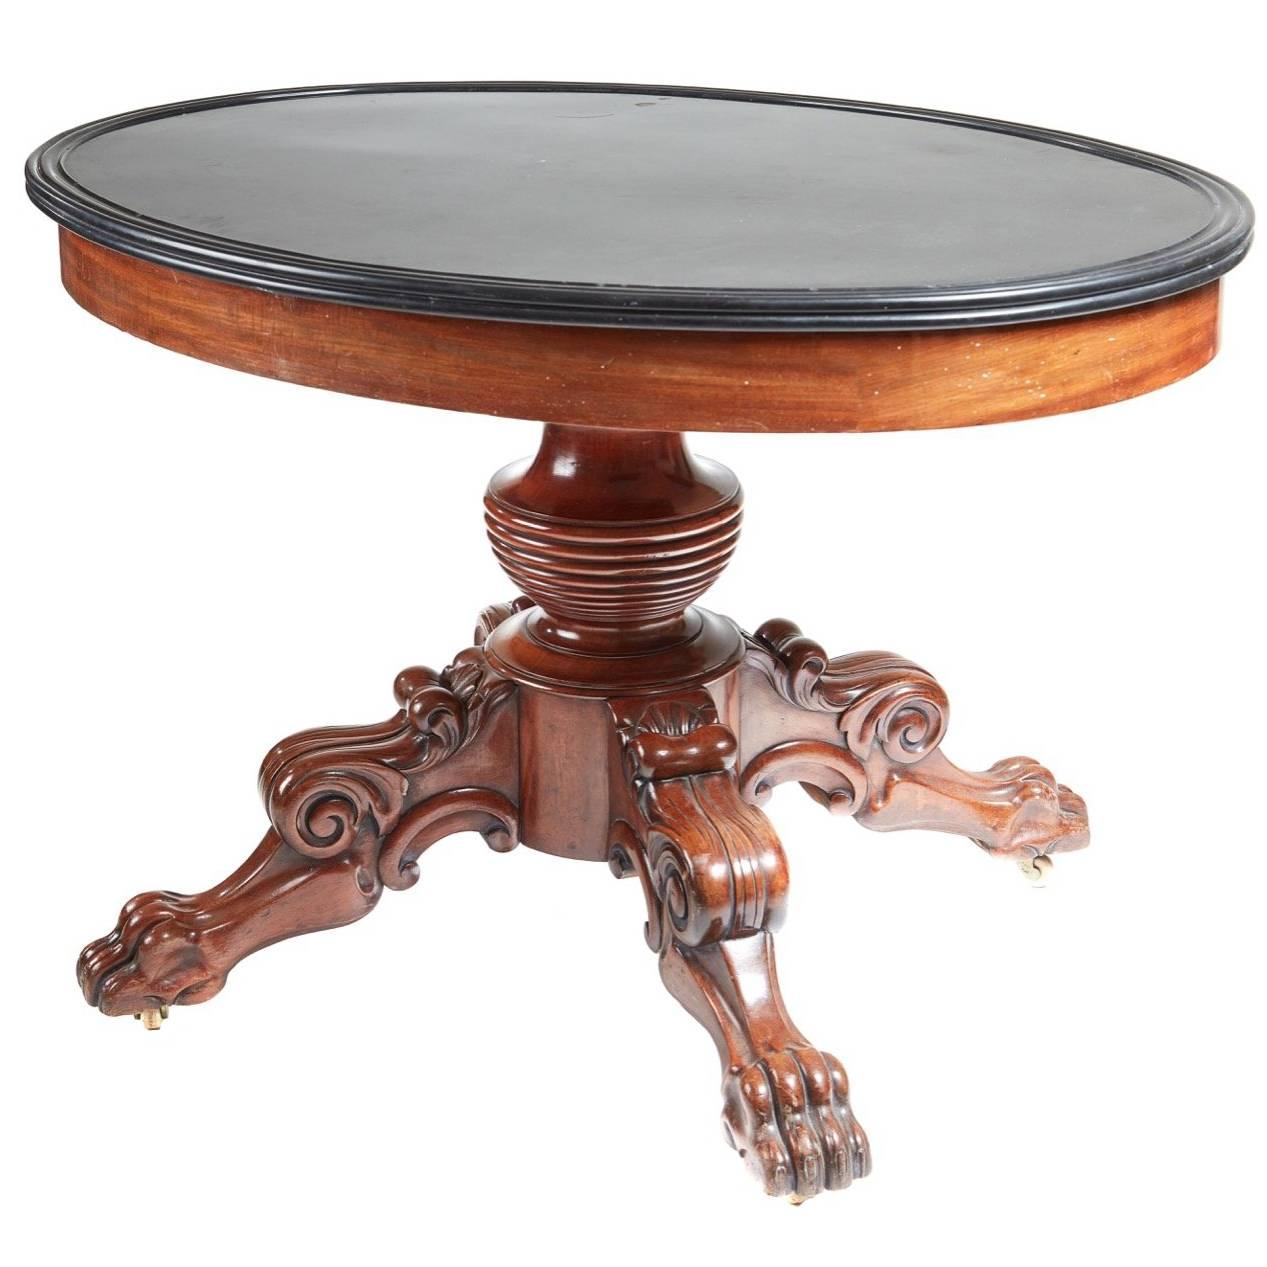 Unusual Antique Oval Marble-Top Gueridon Centre Table For Sale